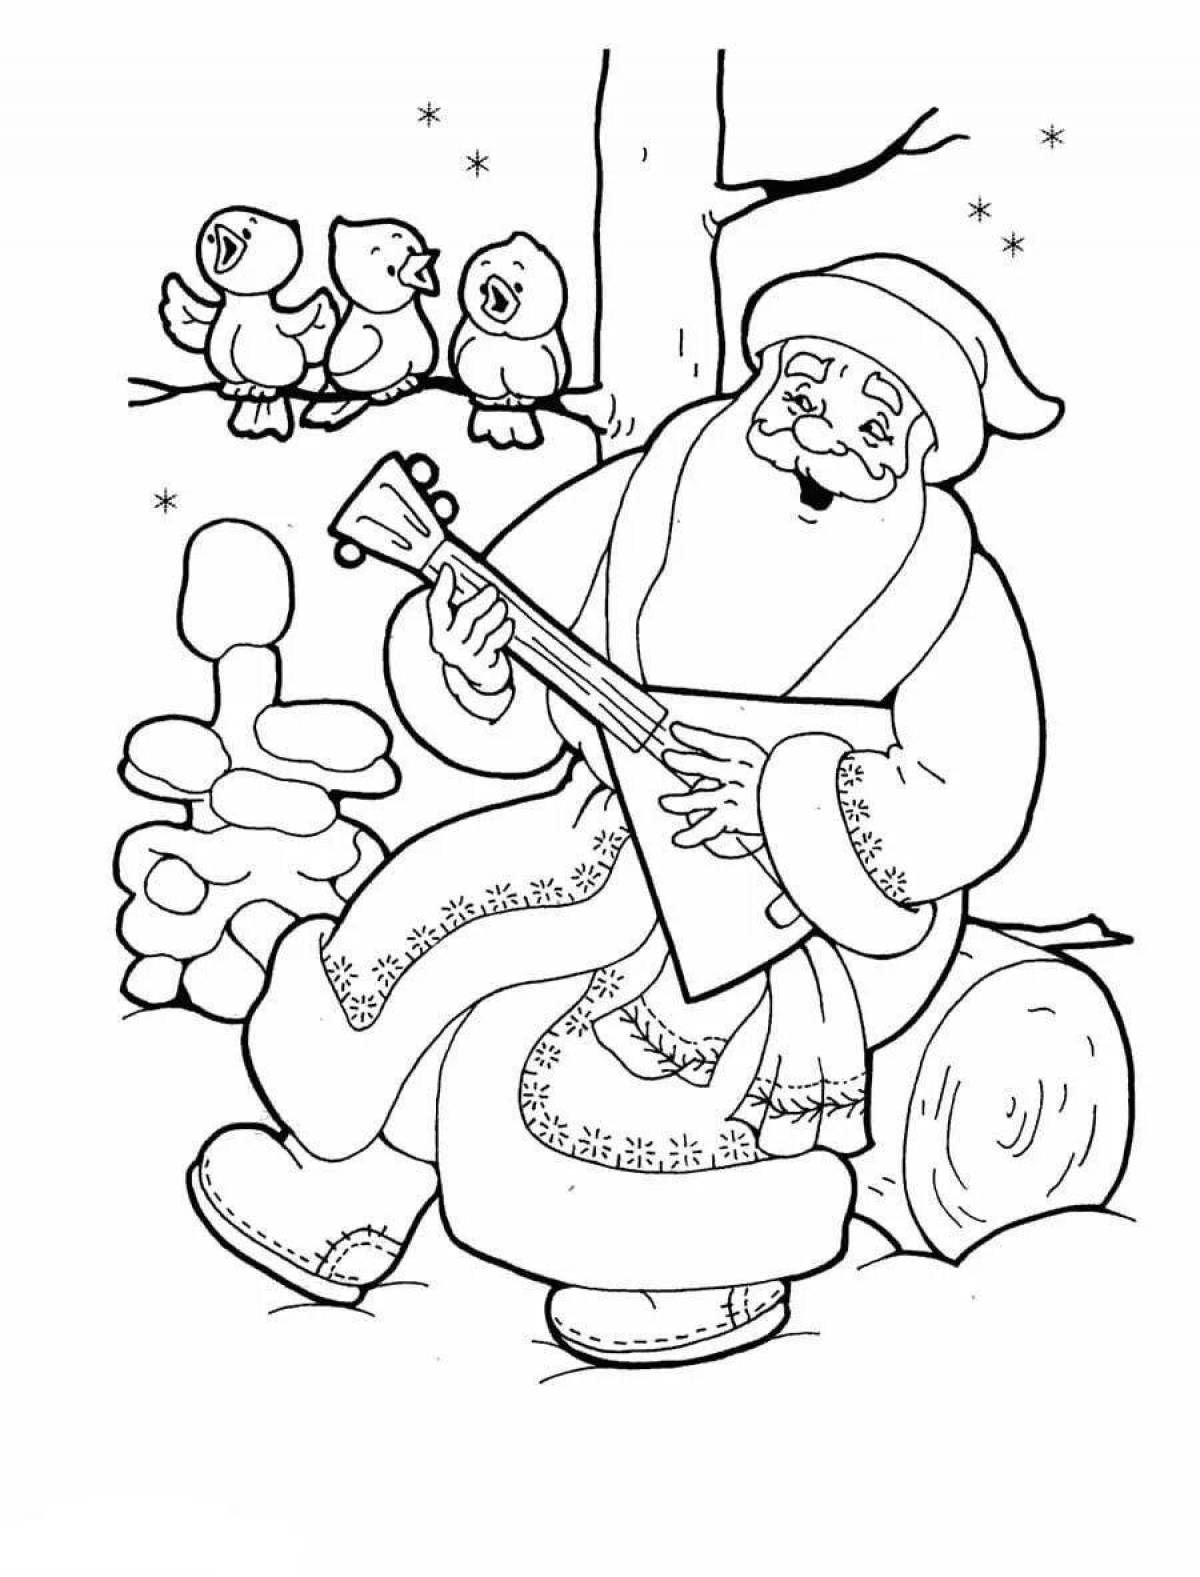 Gourmet governor frost coloring page